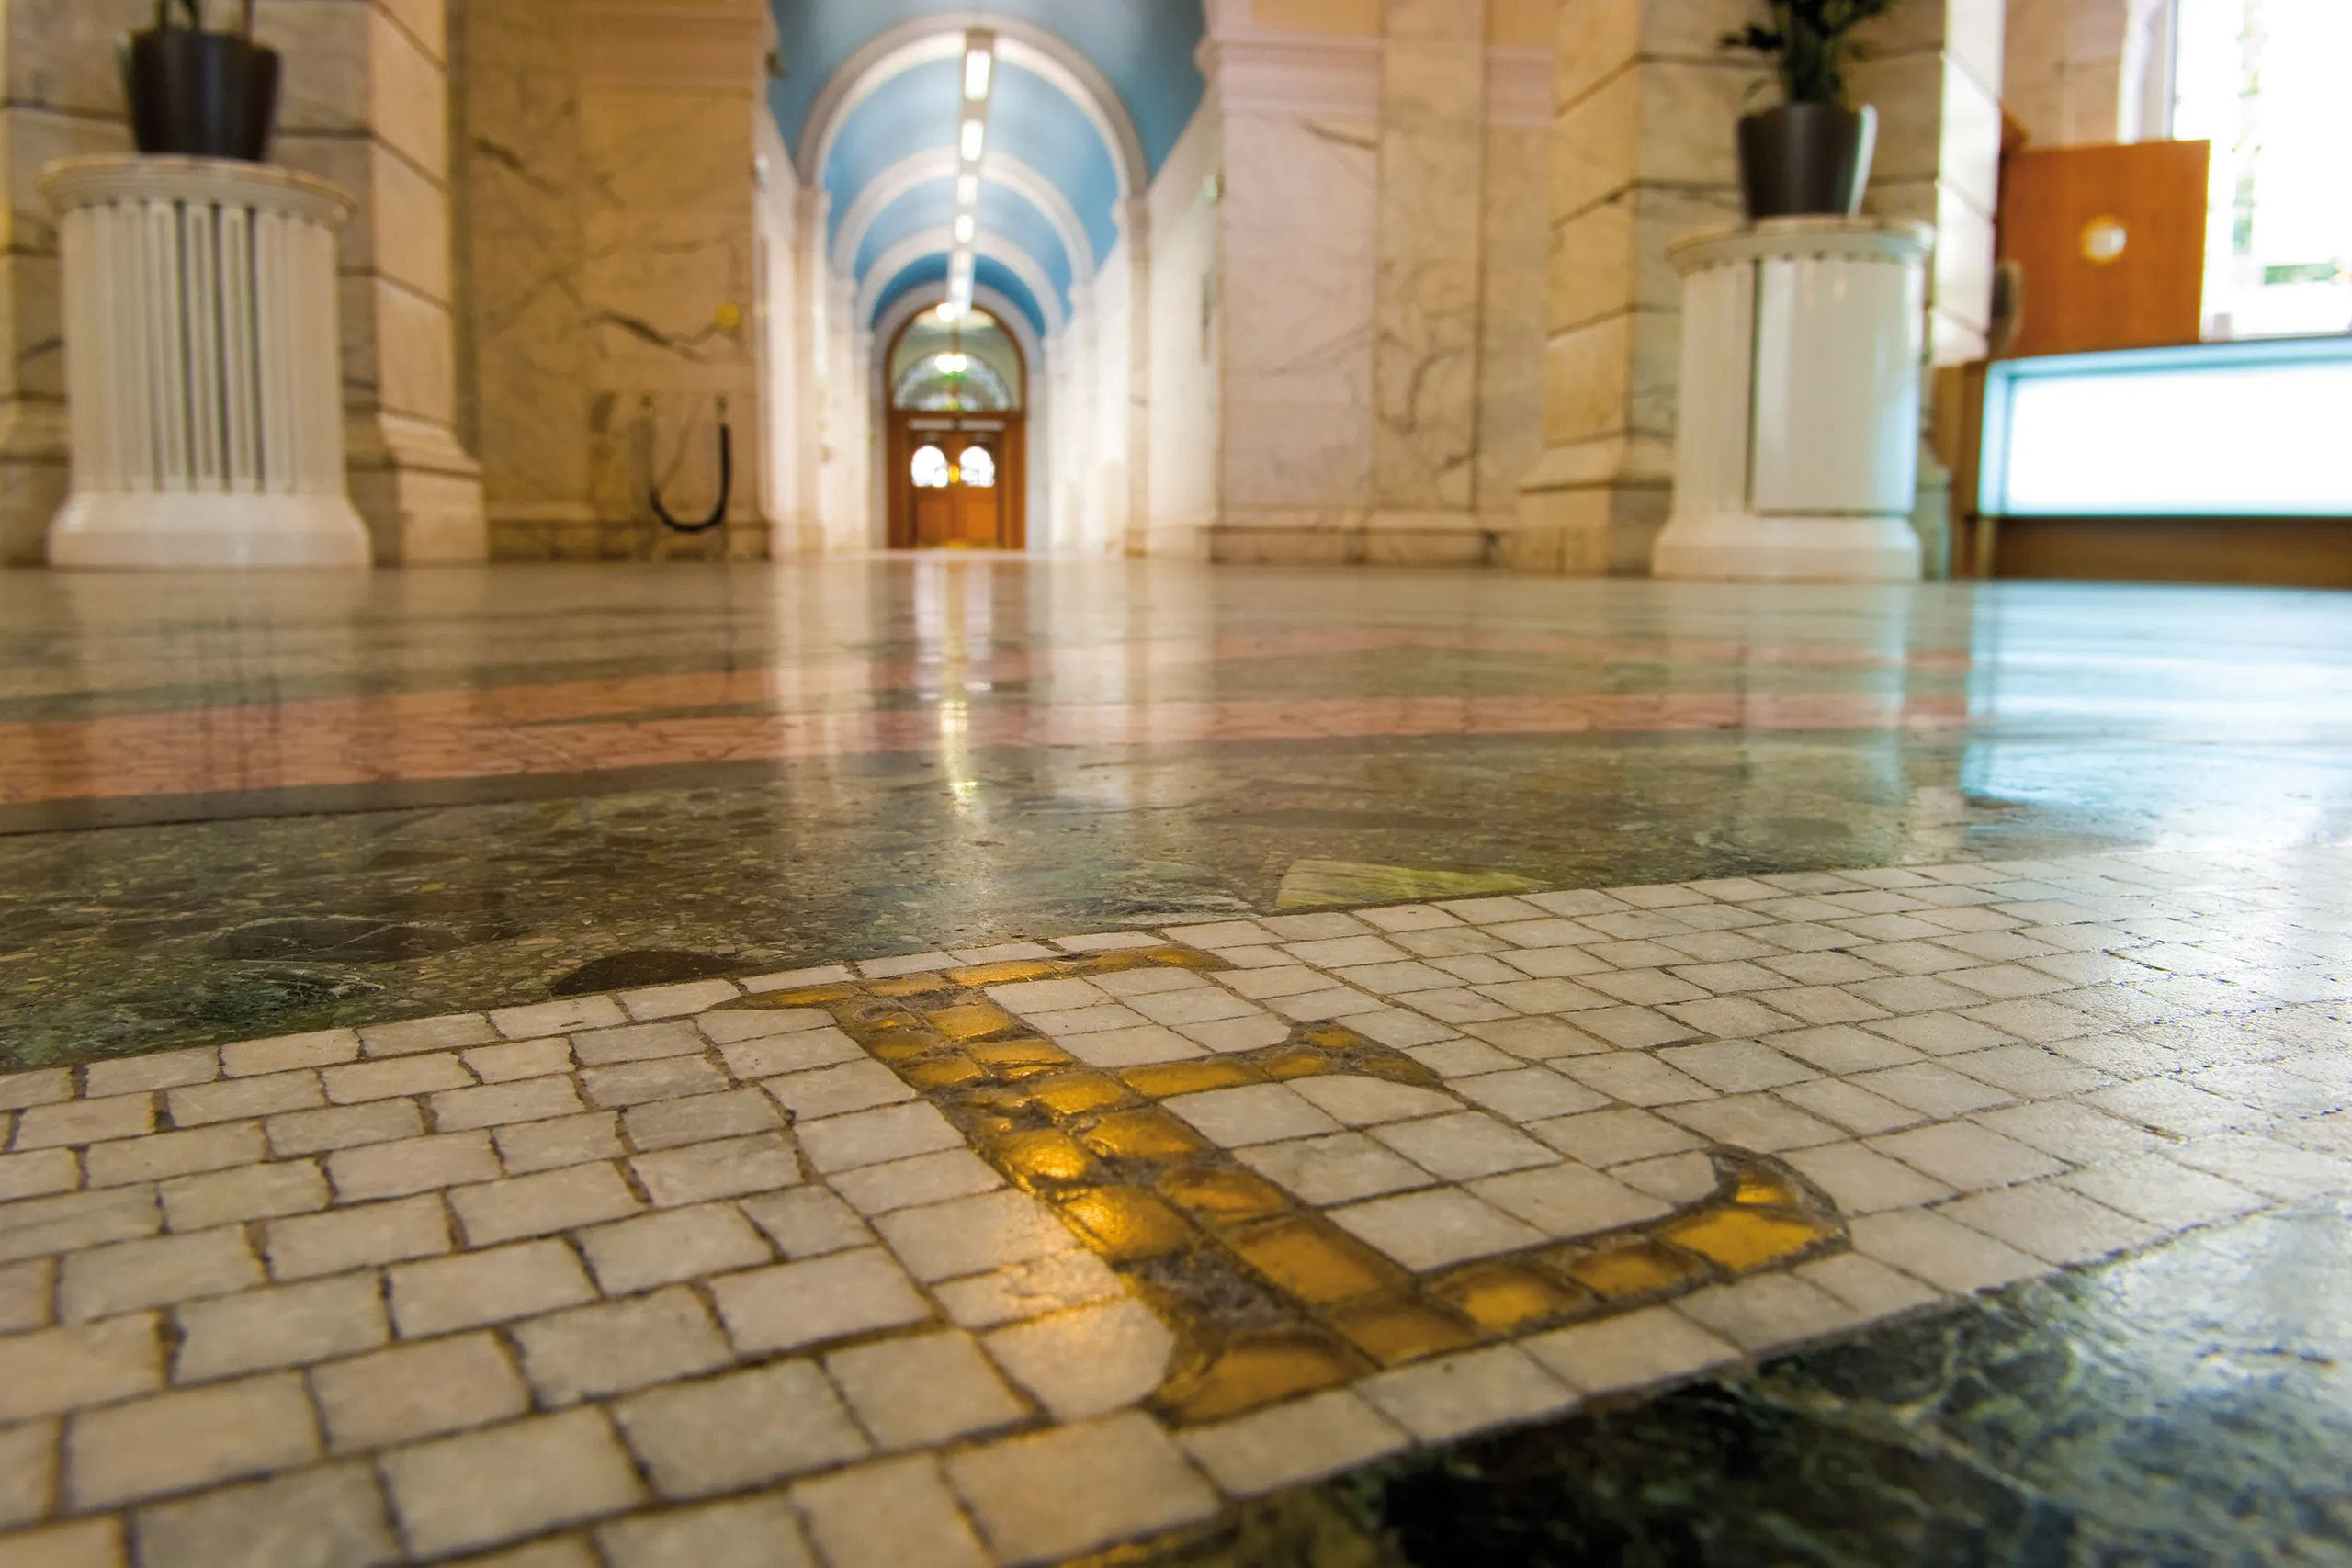 The Port of Liverpool Building, tiled floor